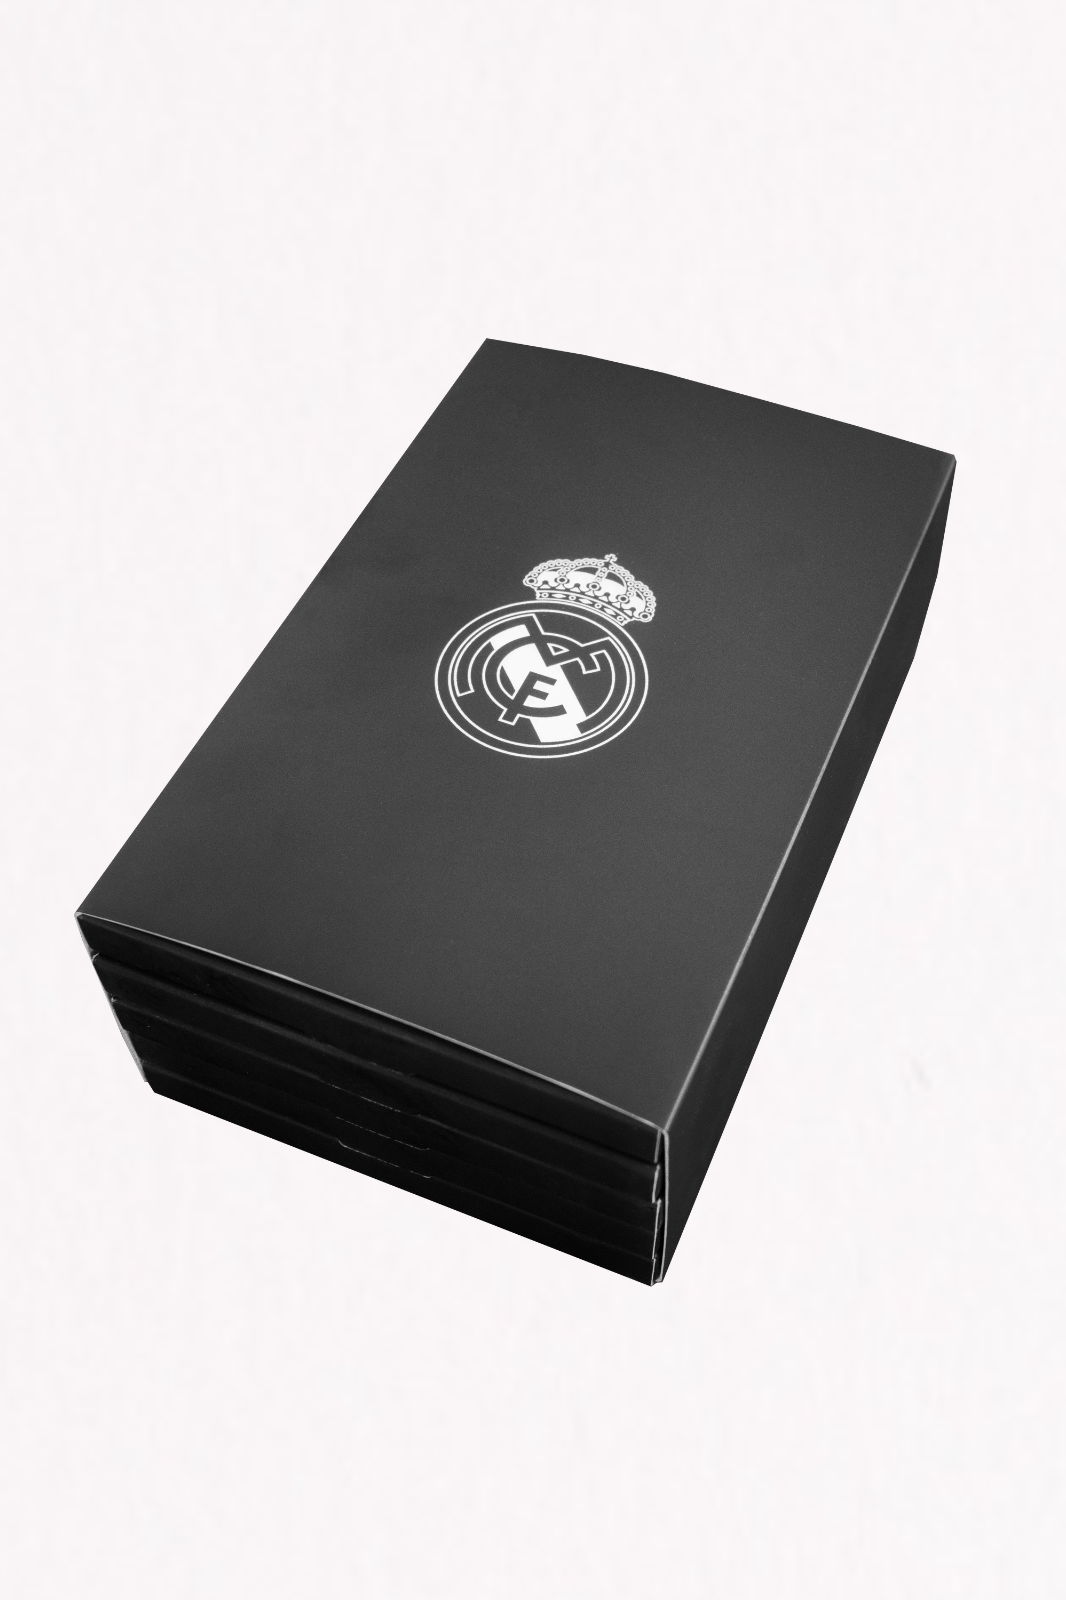 Real Madrid - Mystery Pack of 5 Icons limited to 100